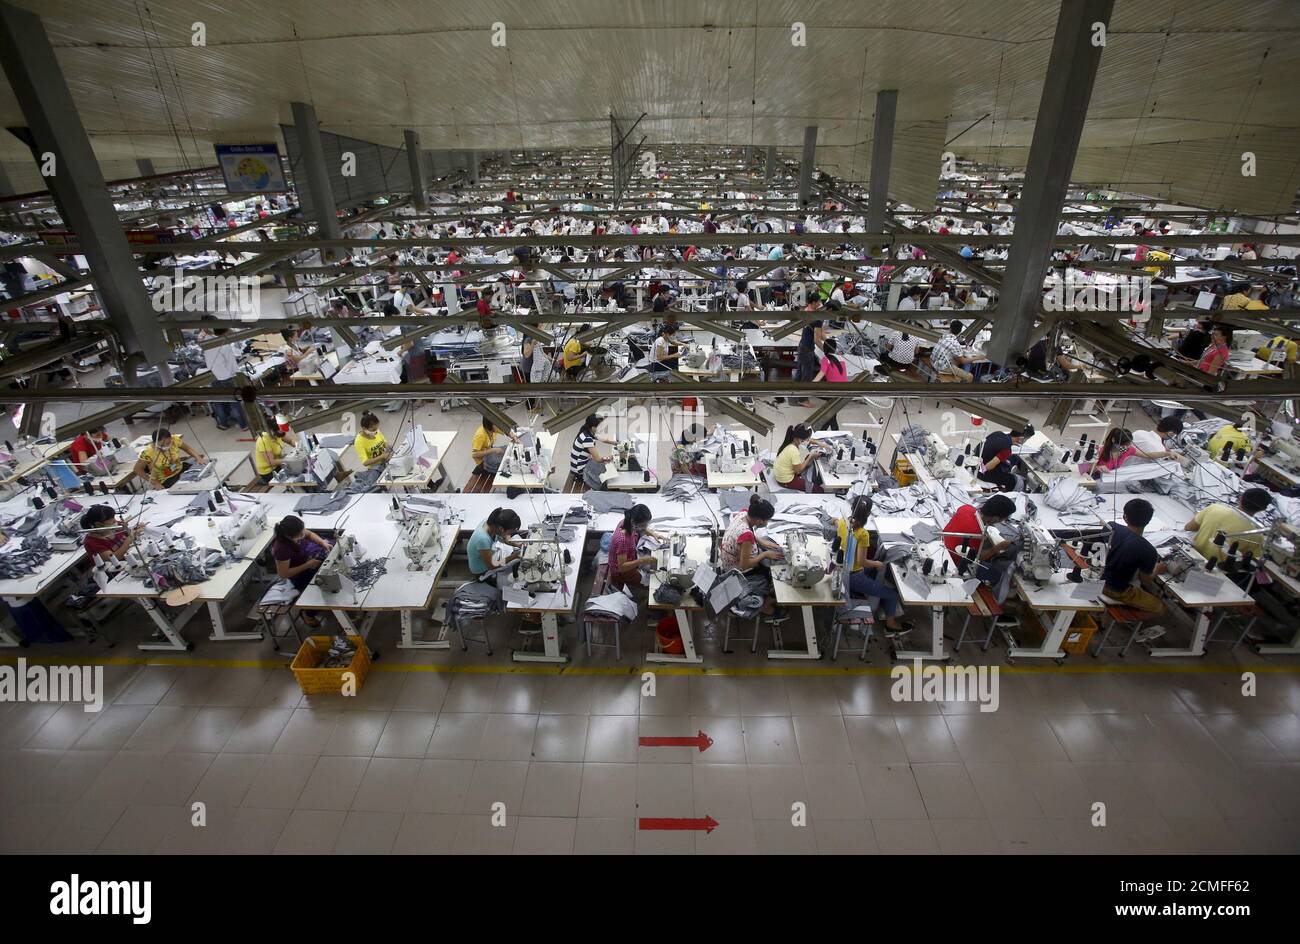 Nike Factory In Asia High Resolution Stock Photography and Images - Alamy